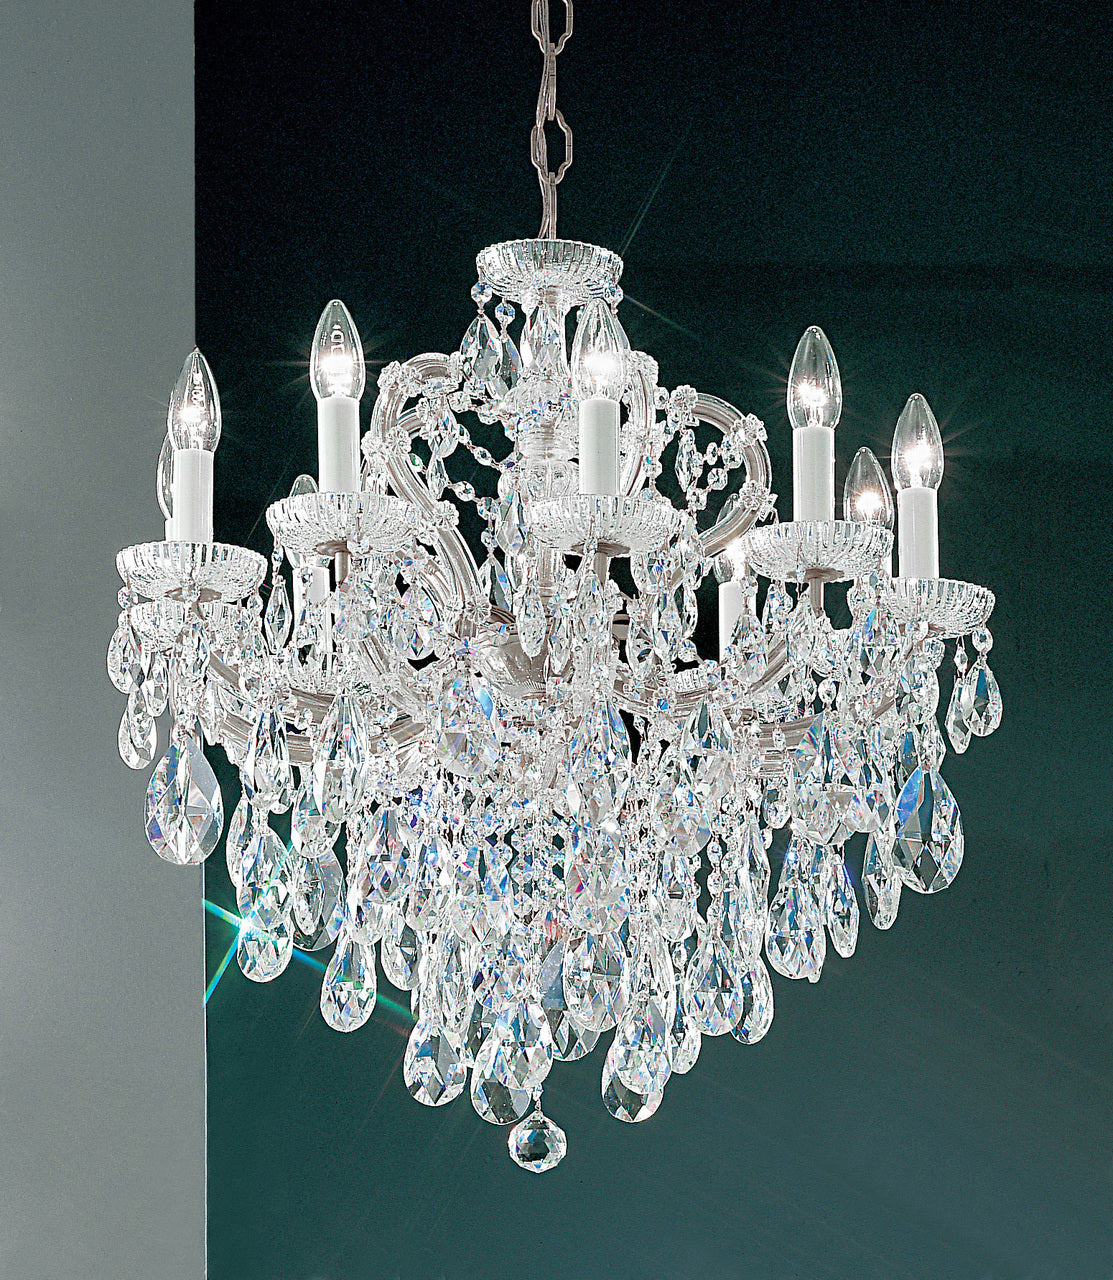 Classic Lighting 8120 CH S Maria Theresa Traditional Crystal Chandelier in Chrome (Imported from Italy)